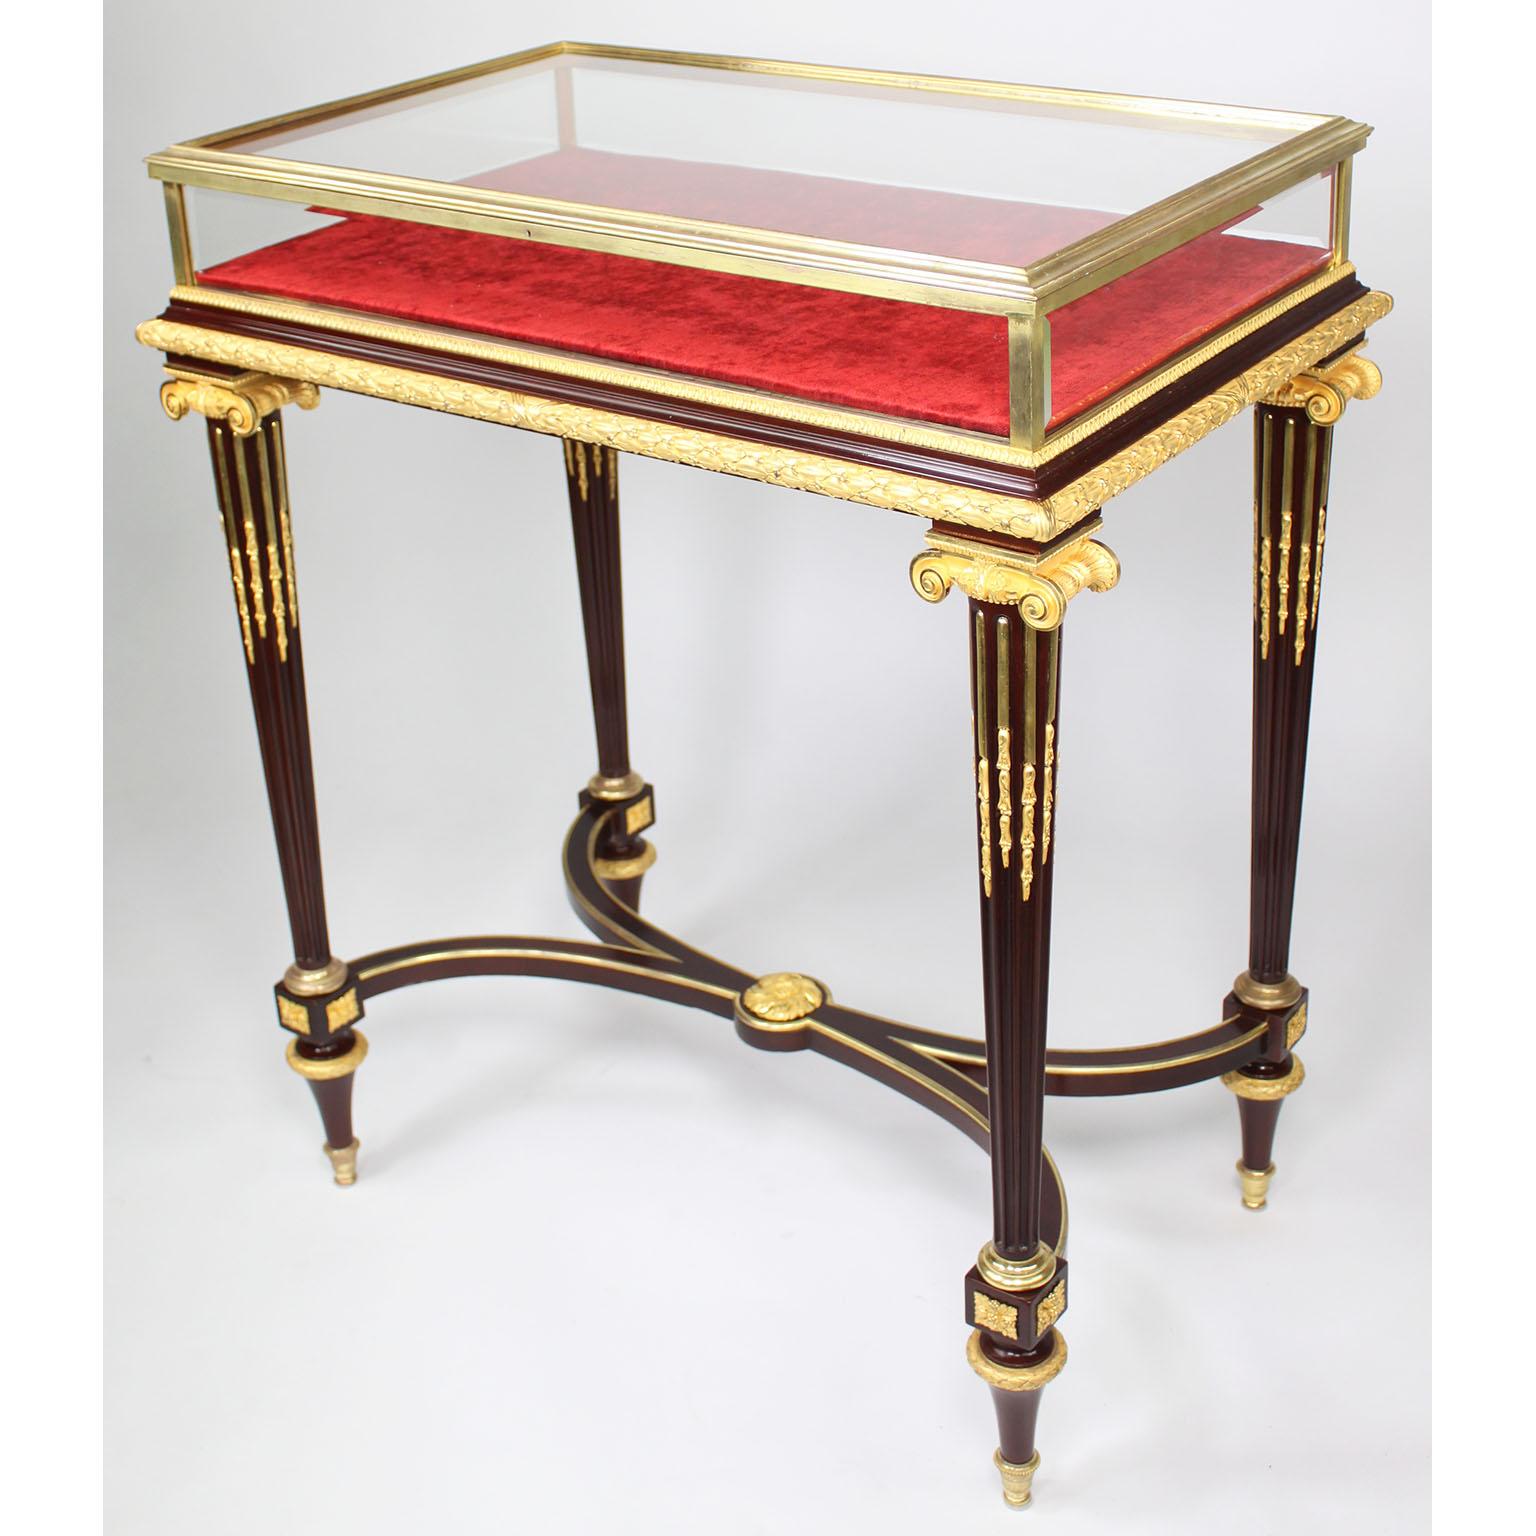 A Very Fine Museum Quality French 19th Century Louis XVI Style Mahogany and Gilt-Bronze Ormolu Mounted Bijouterie (Jewelry) Vitrine Table by Henri Dasson, with a glazed, hinged top and beveled glass sides within a molded bronze frame, opening to a